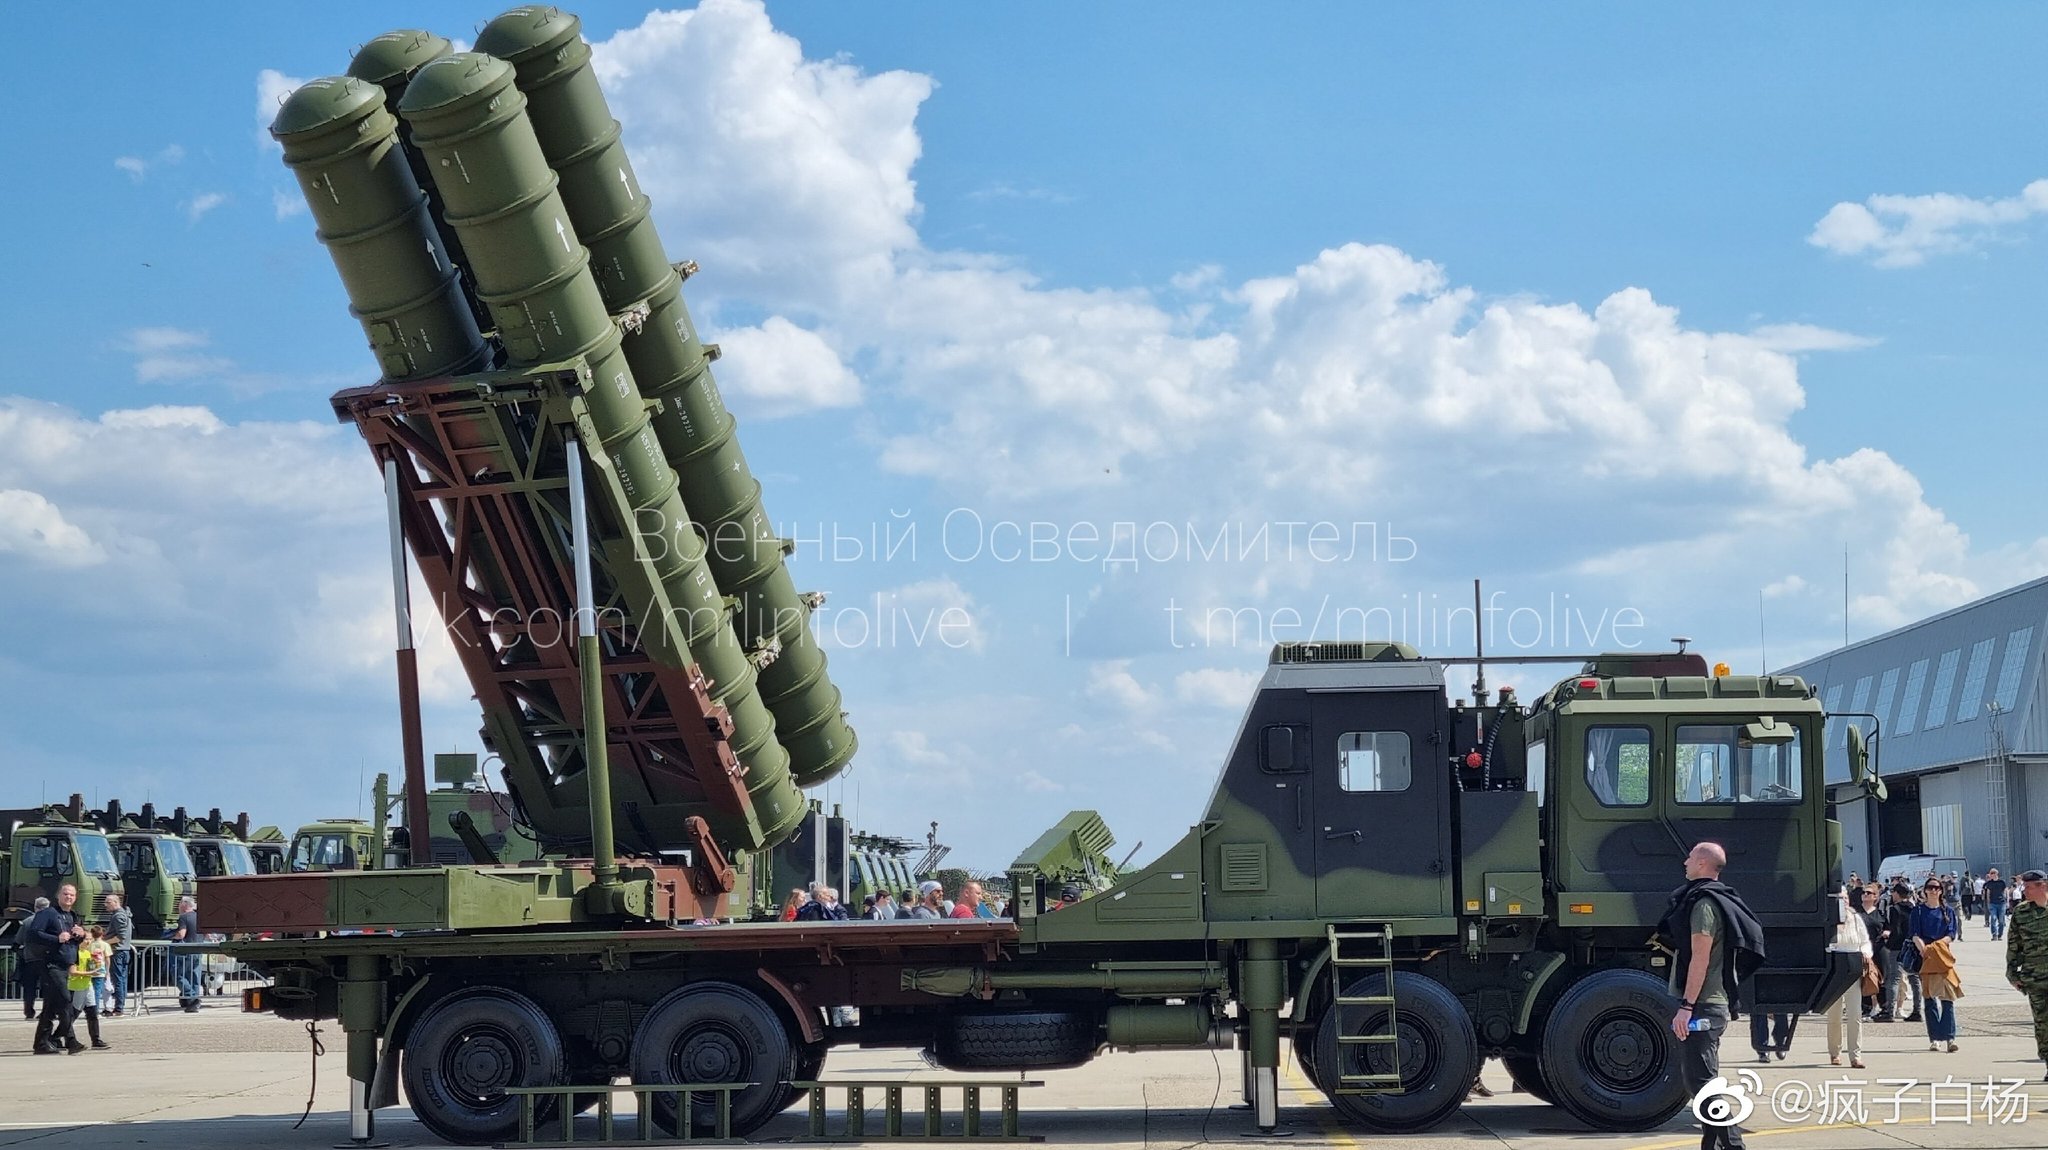 Jesus Roman on X: "1/4 🇨🇳FK-3 (HQ-22) Air Defense missile (TEL vehicle & ammunition transport vehicle) with JSG-100 surveillance & H-200 phased array guidance radar systems displayed by 🇷🇸Serbia Armed Forces (via